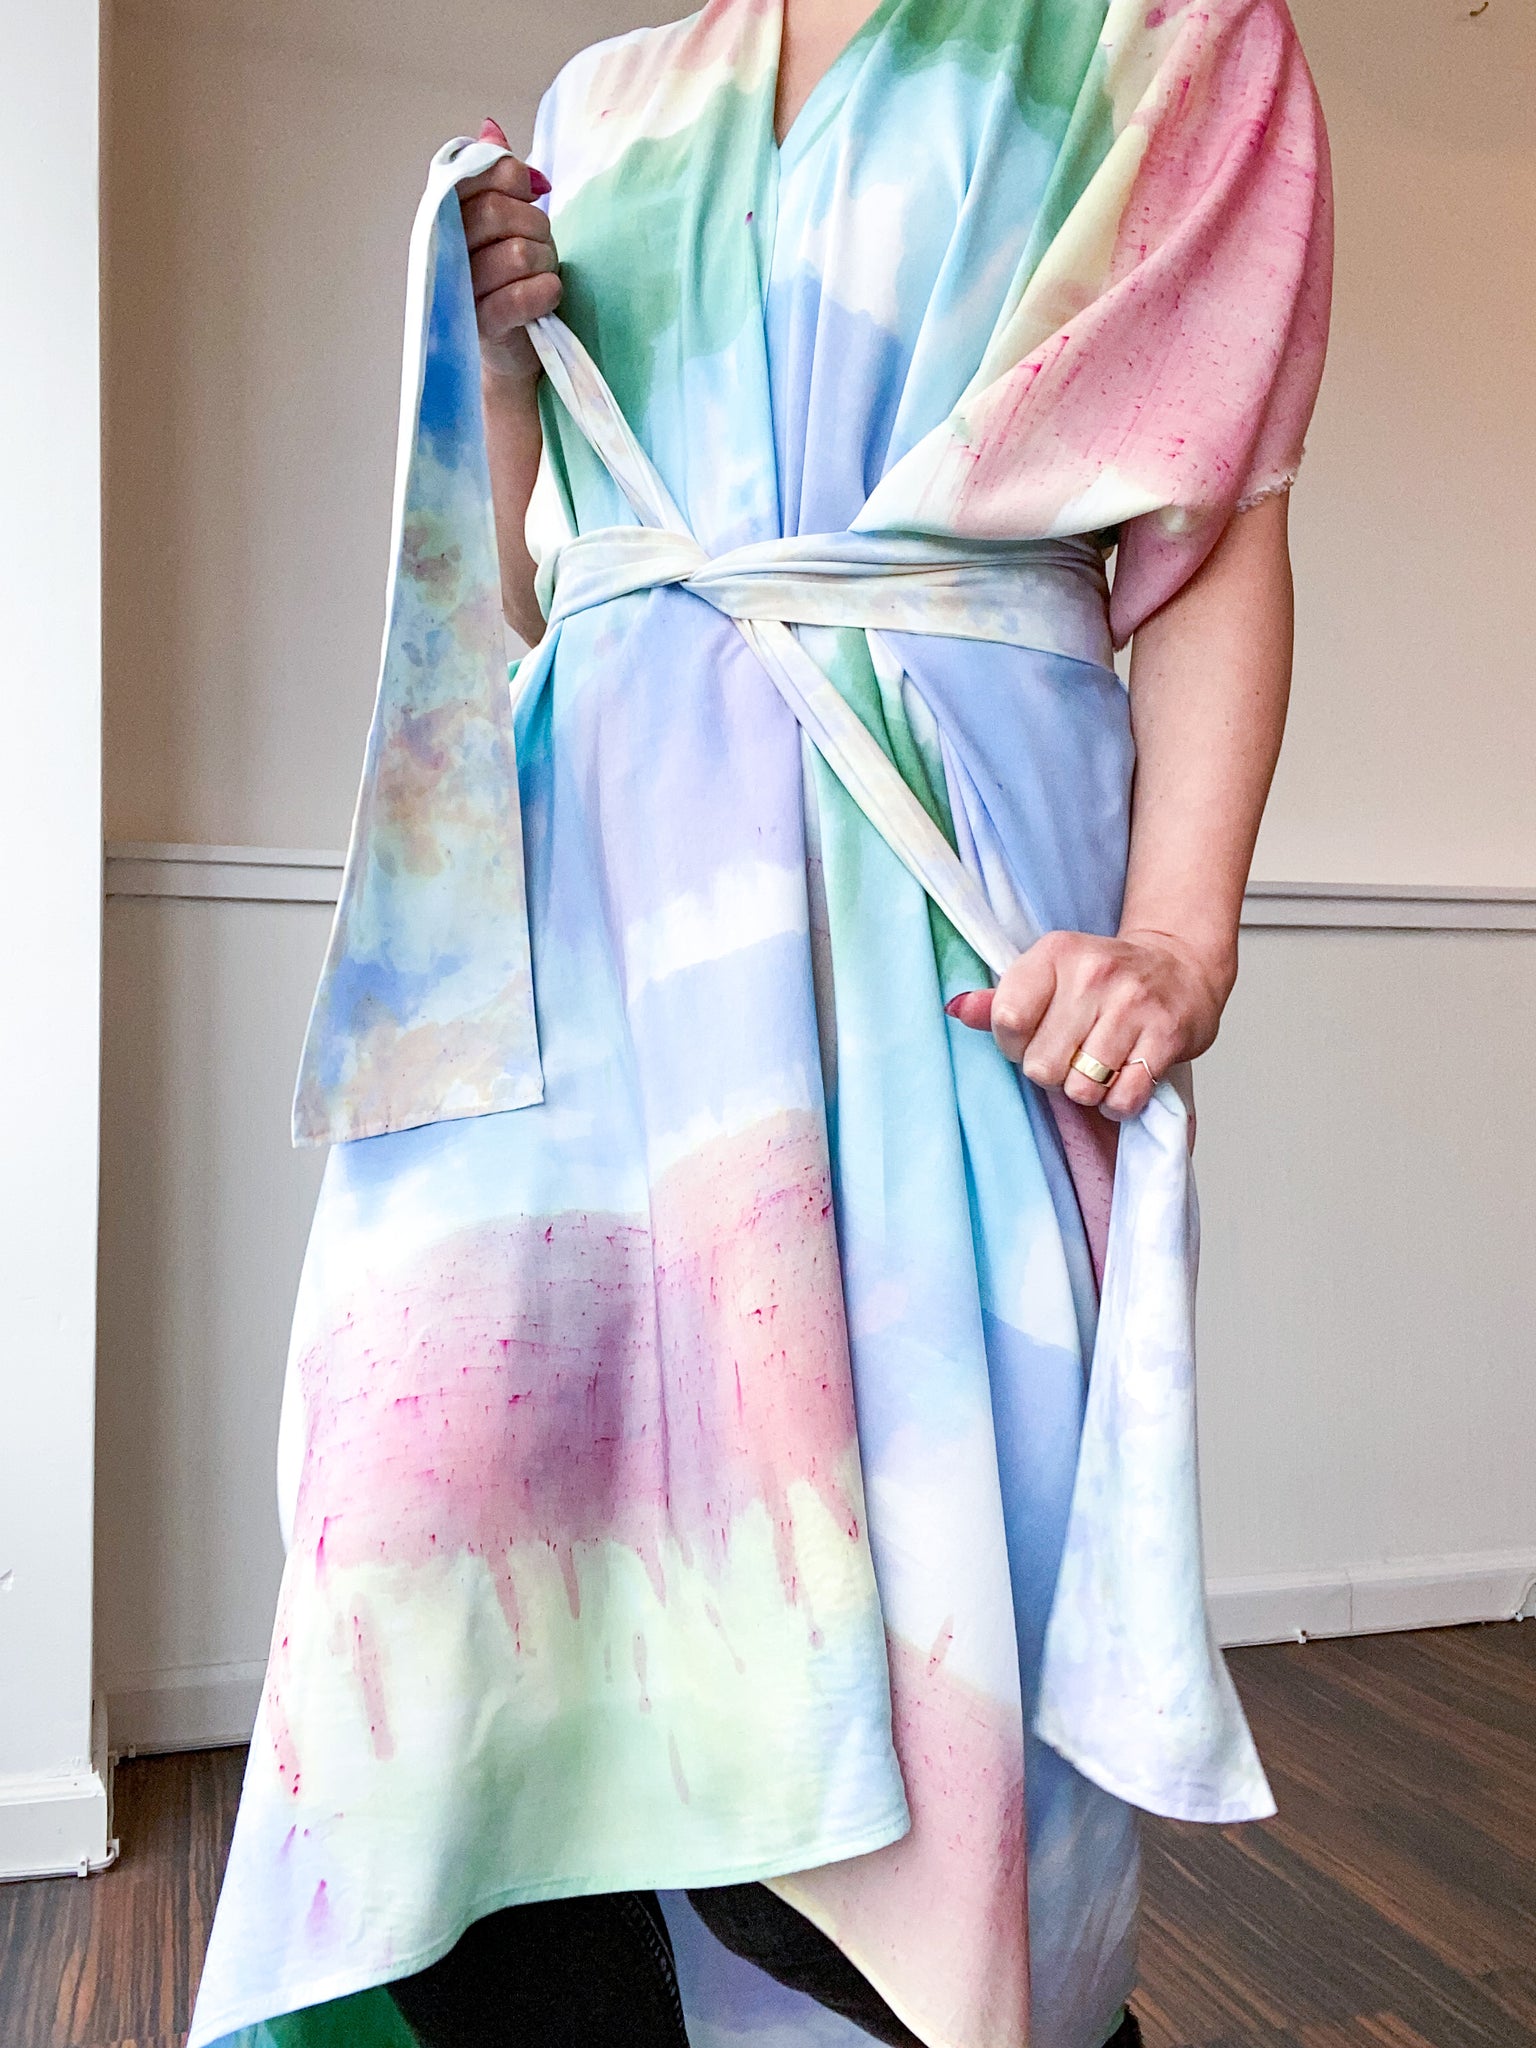 Limited Edition Hand-Dyed High Low Kimono Pastel Watercolor